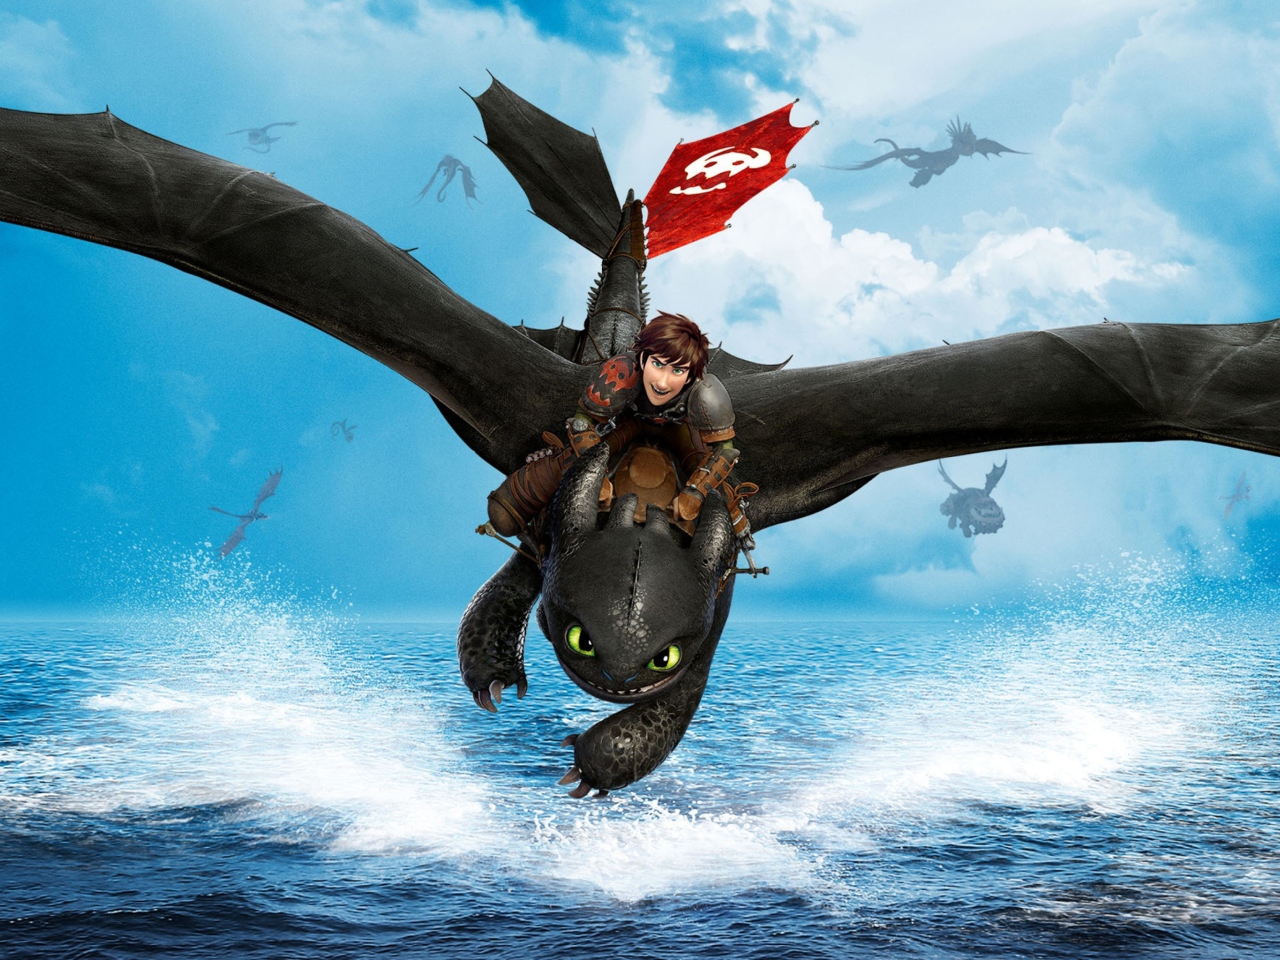 2014 How To Train Your Dragon wallpaper 1280x960